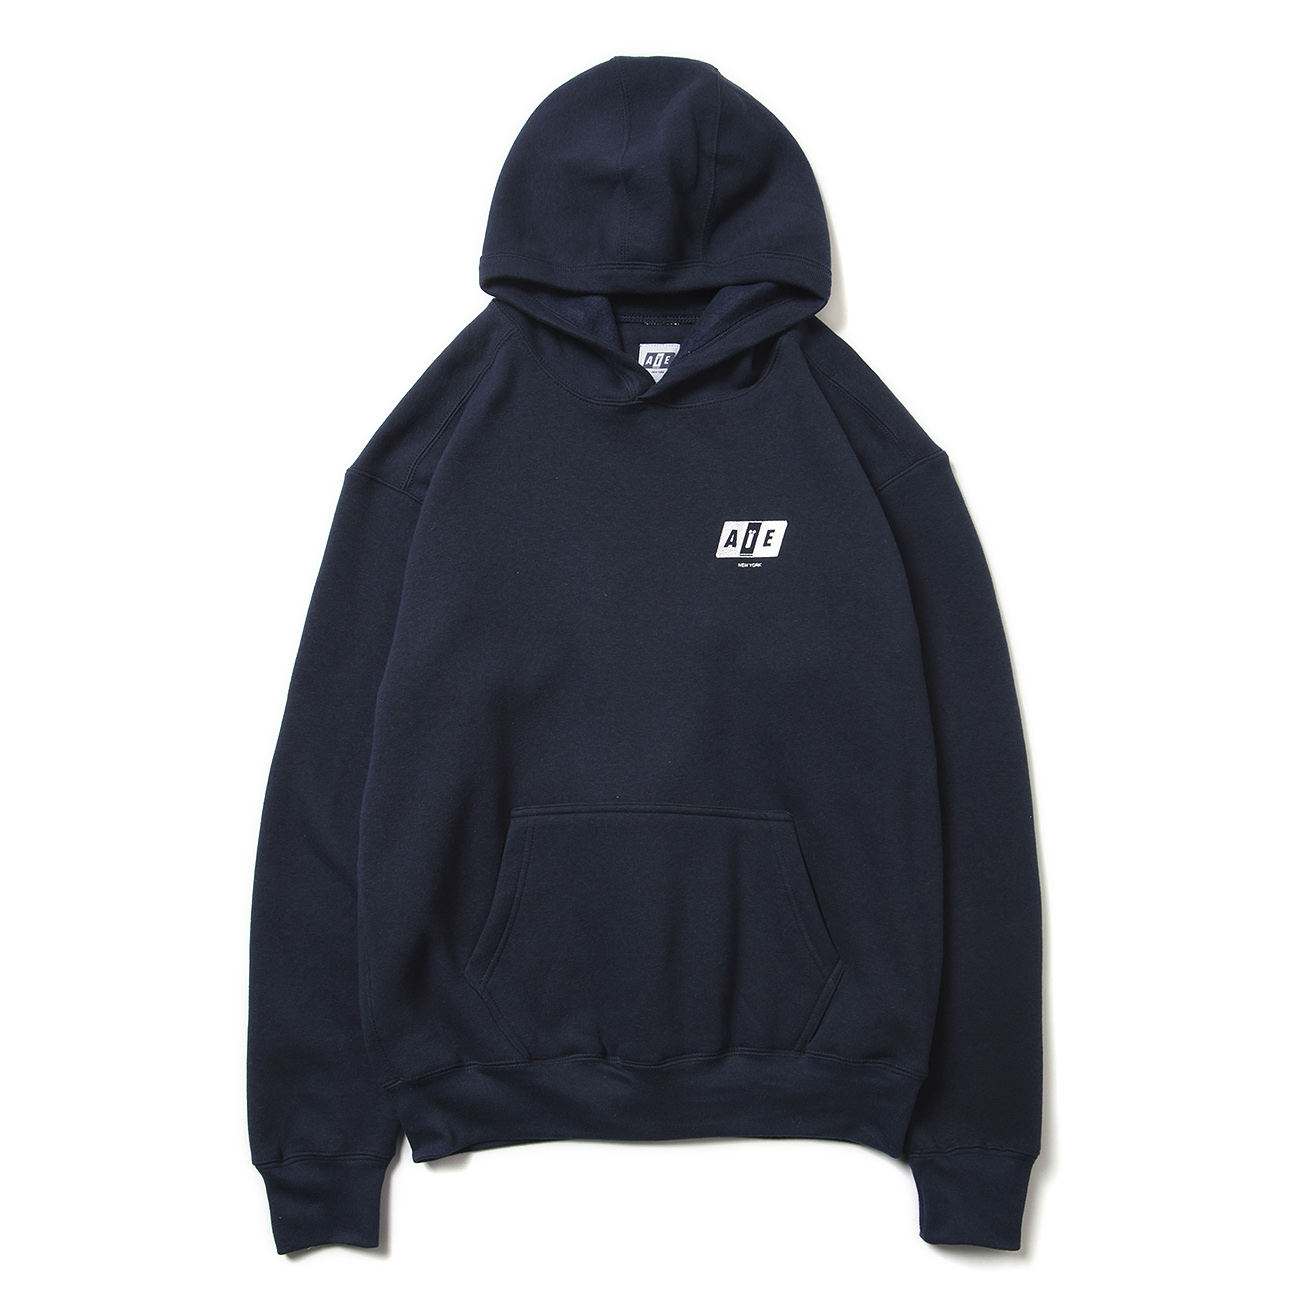 AiE / エーアイイー | Printed Hoody - AiE NY - Navy | 通販 - 正規